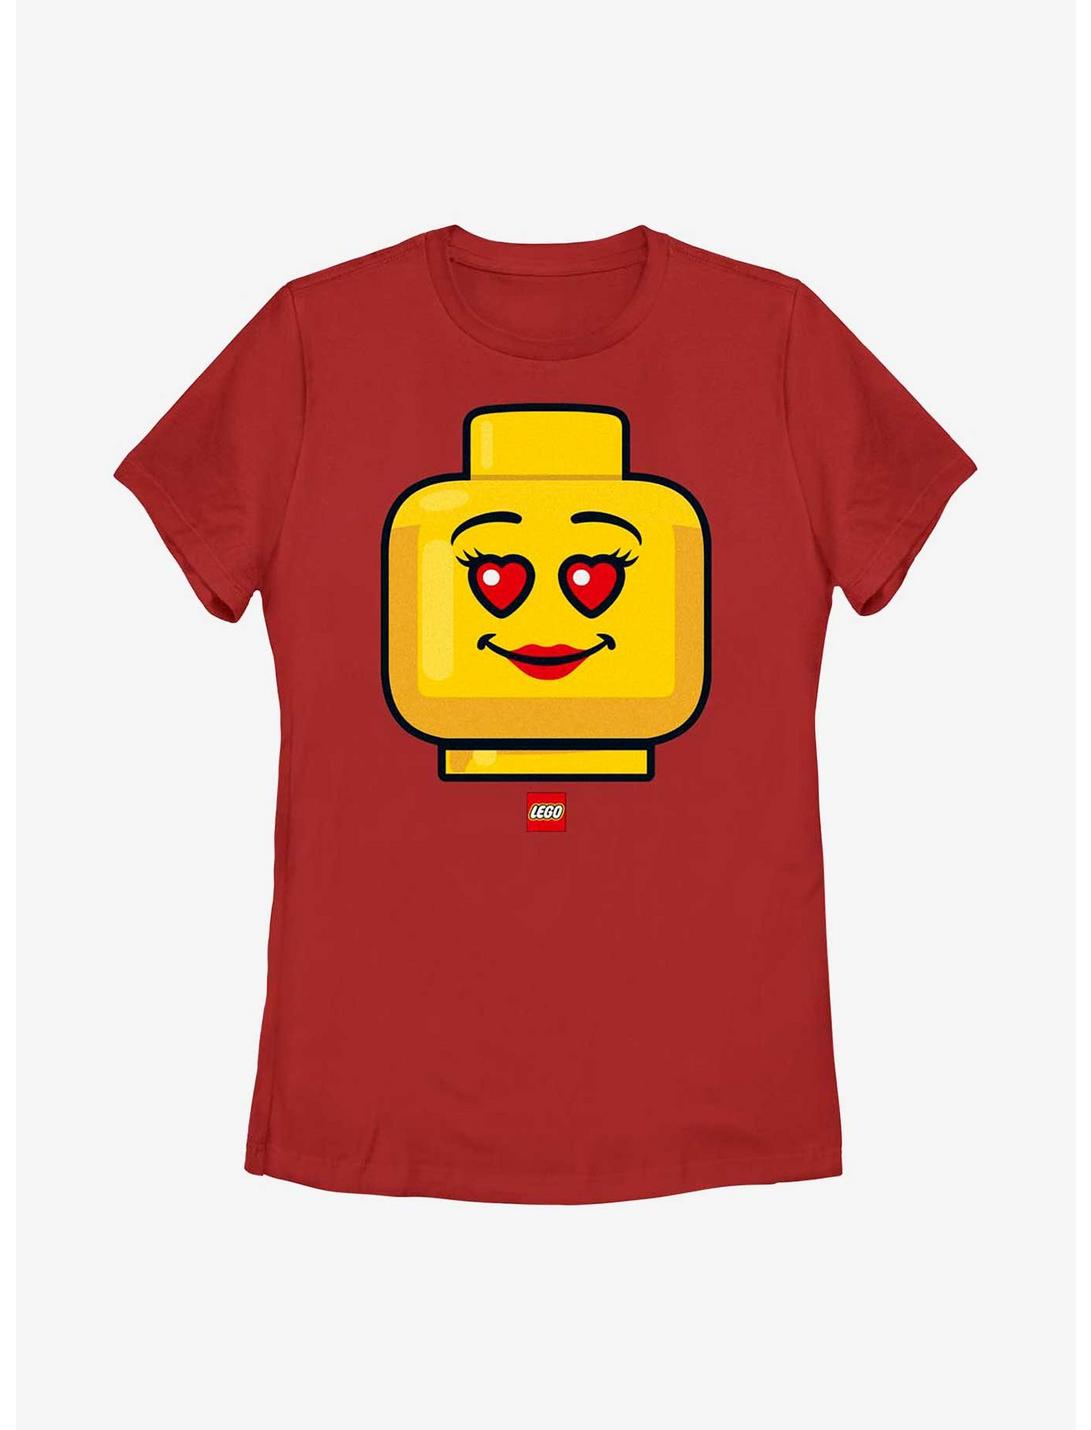 LEGO Iconic Heart Eyes Womens T-Shirt, RED, hi-res